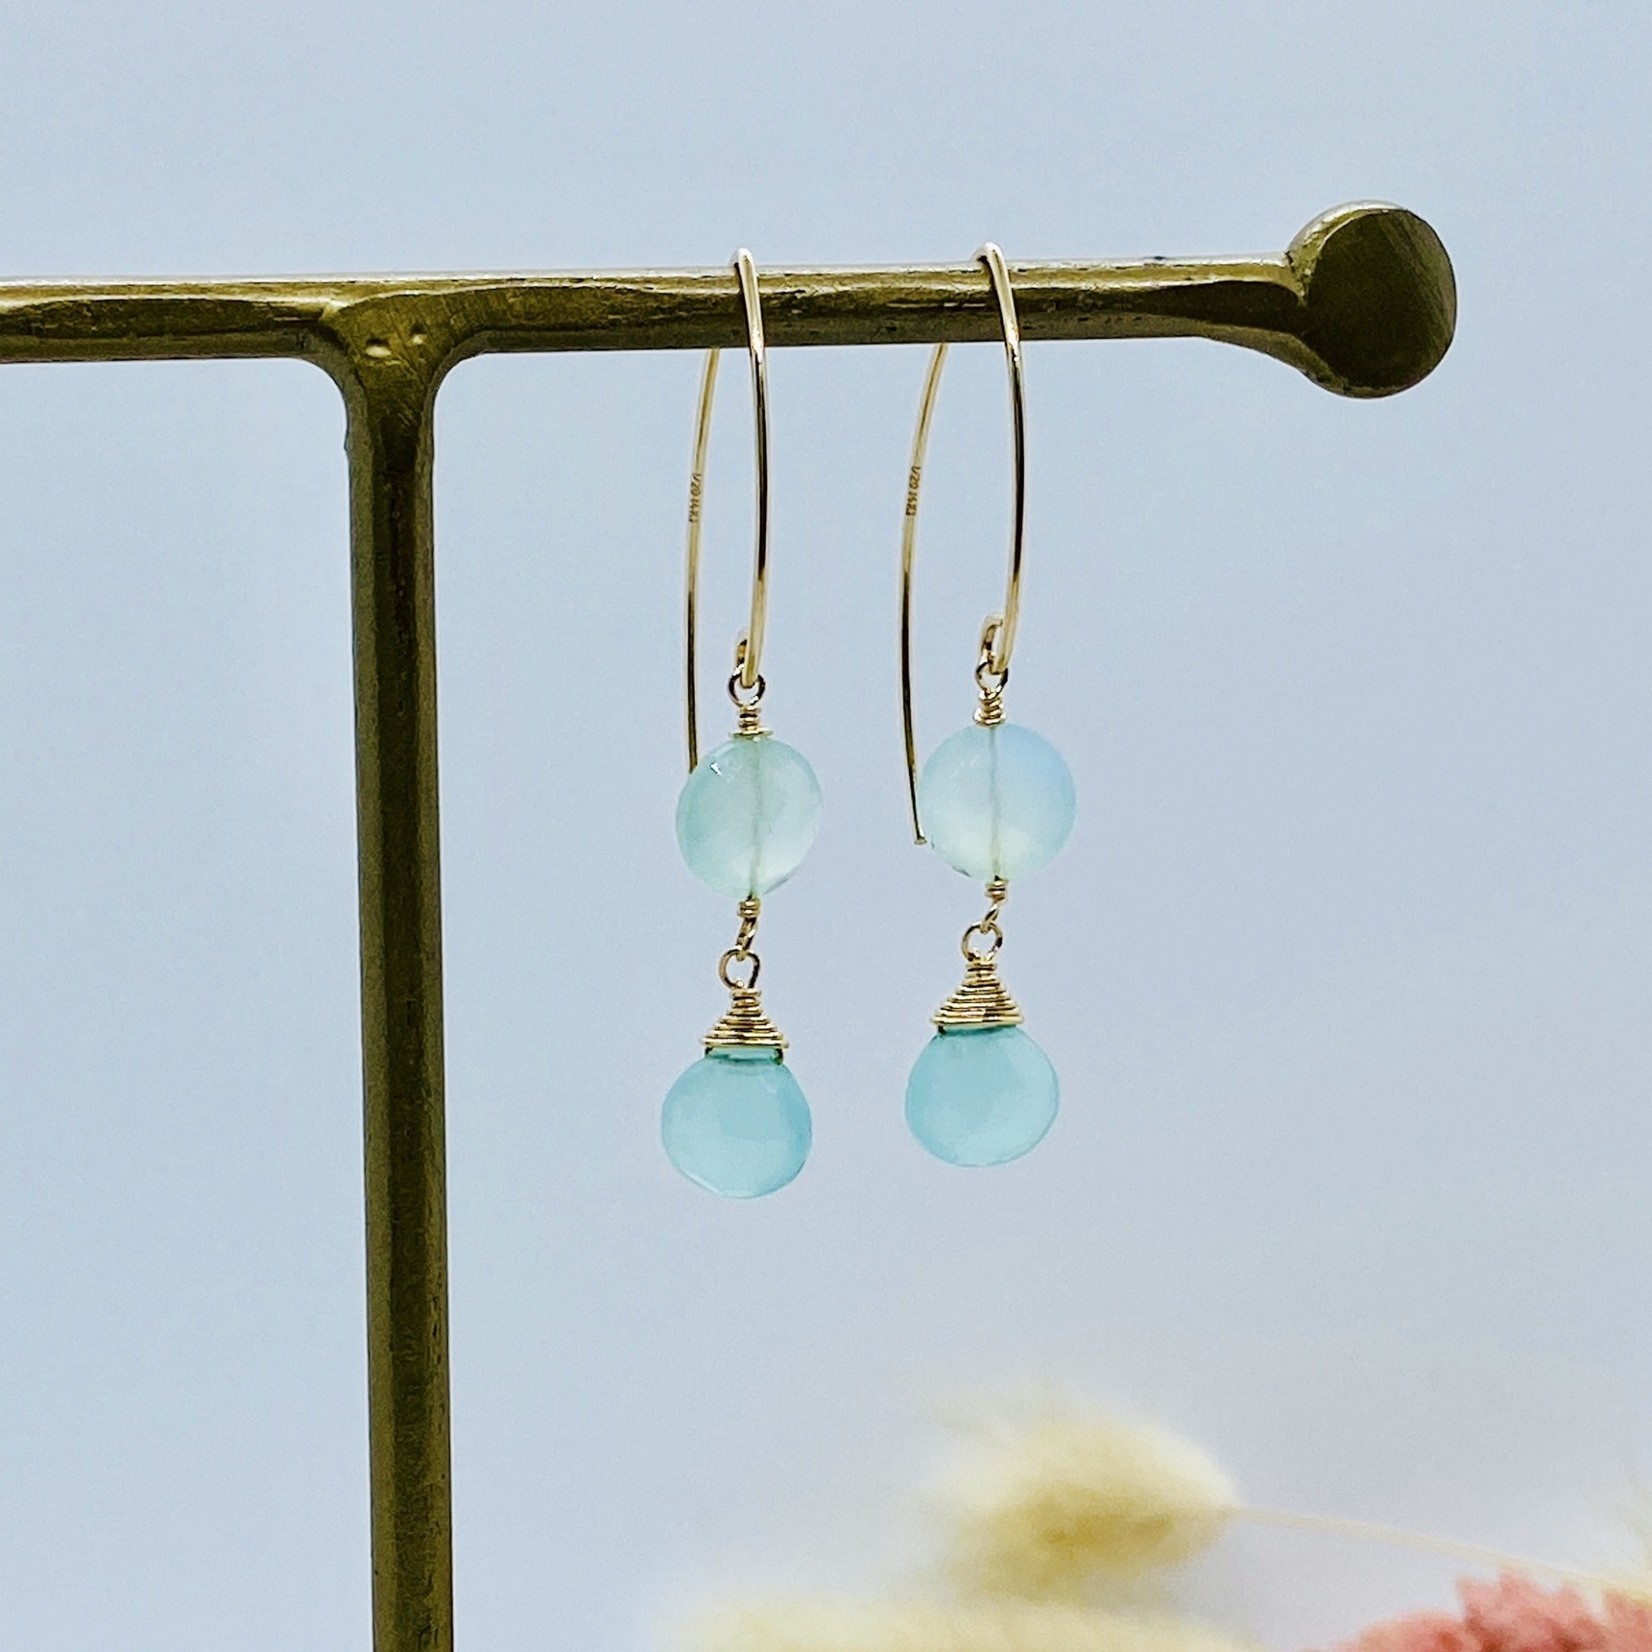 EVANKNOX Handmade Earrings with peruvian chalcedony coin, briolette, 14 k g.f.